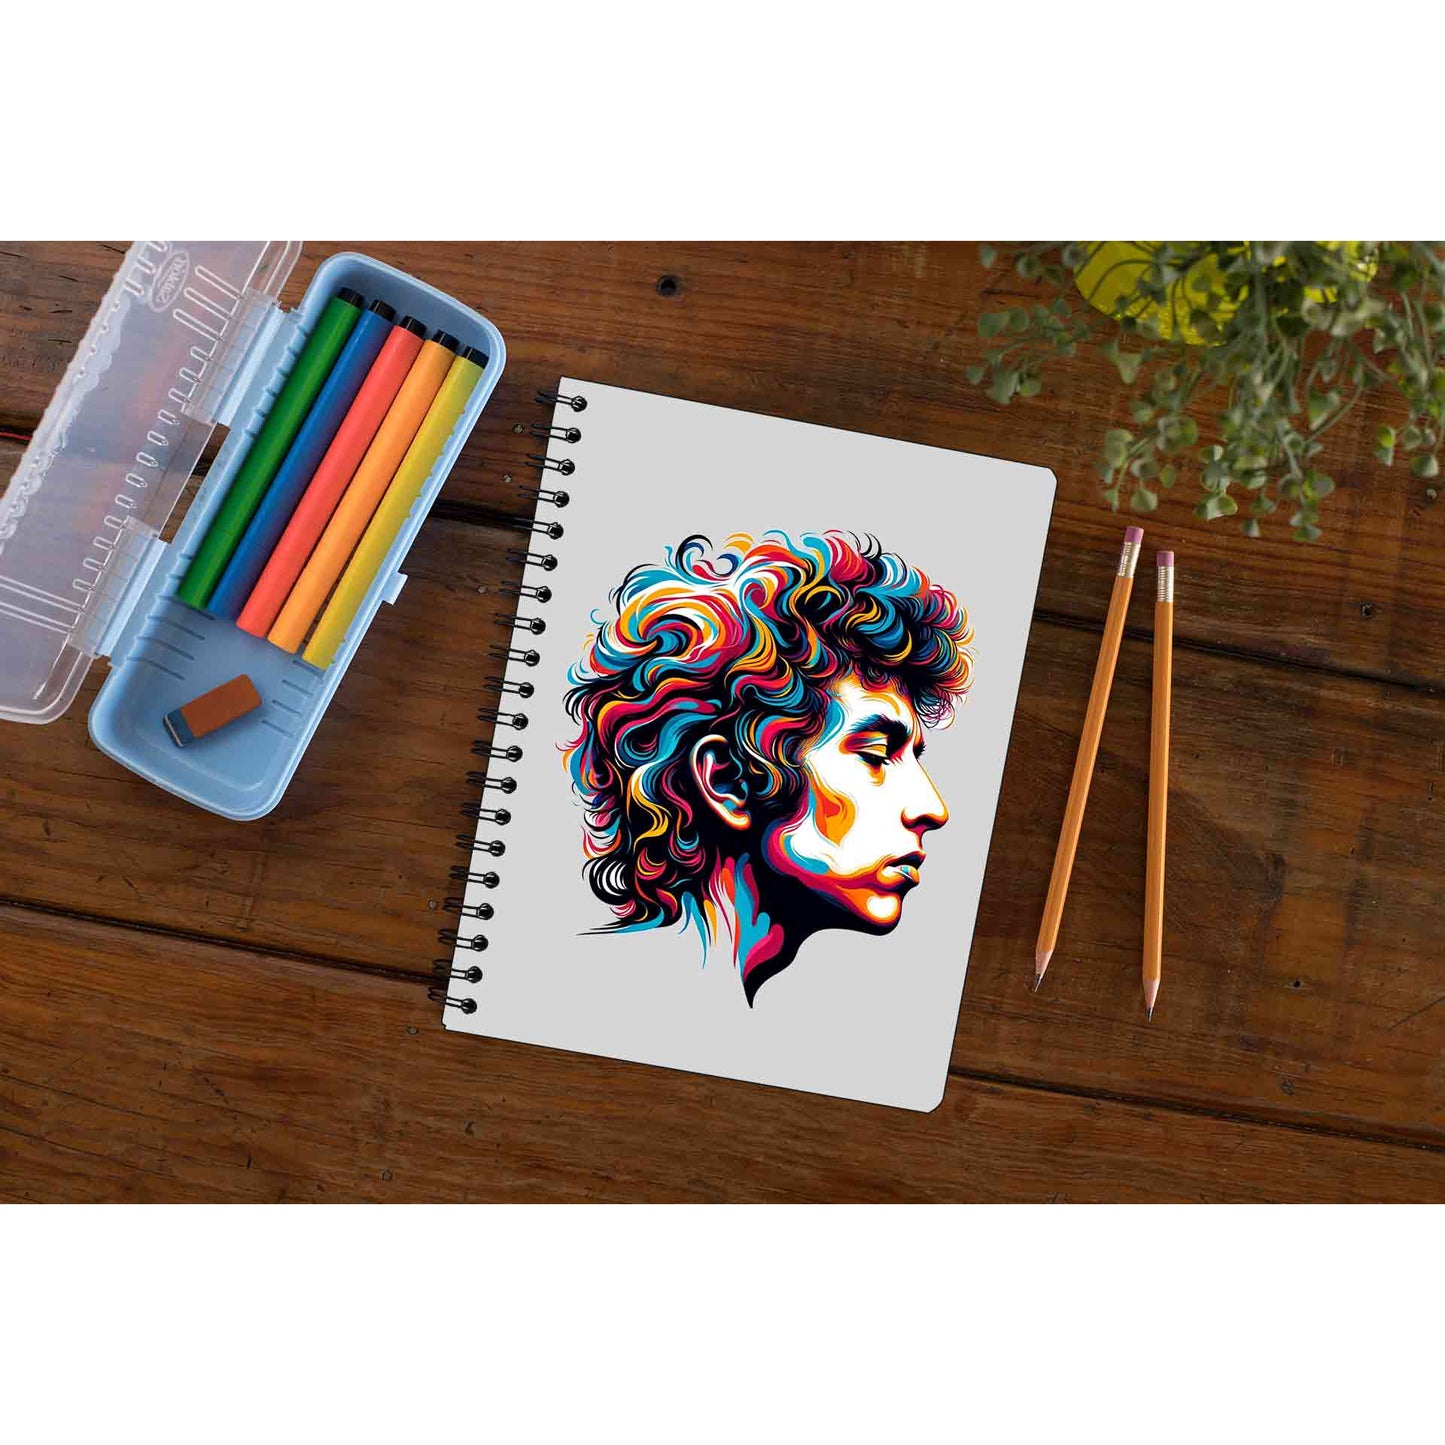 bob dylan fan art notebook notepad diary buy online india the banyan tee tbt unruled 